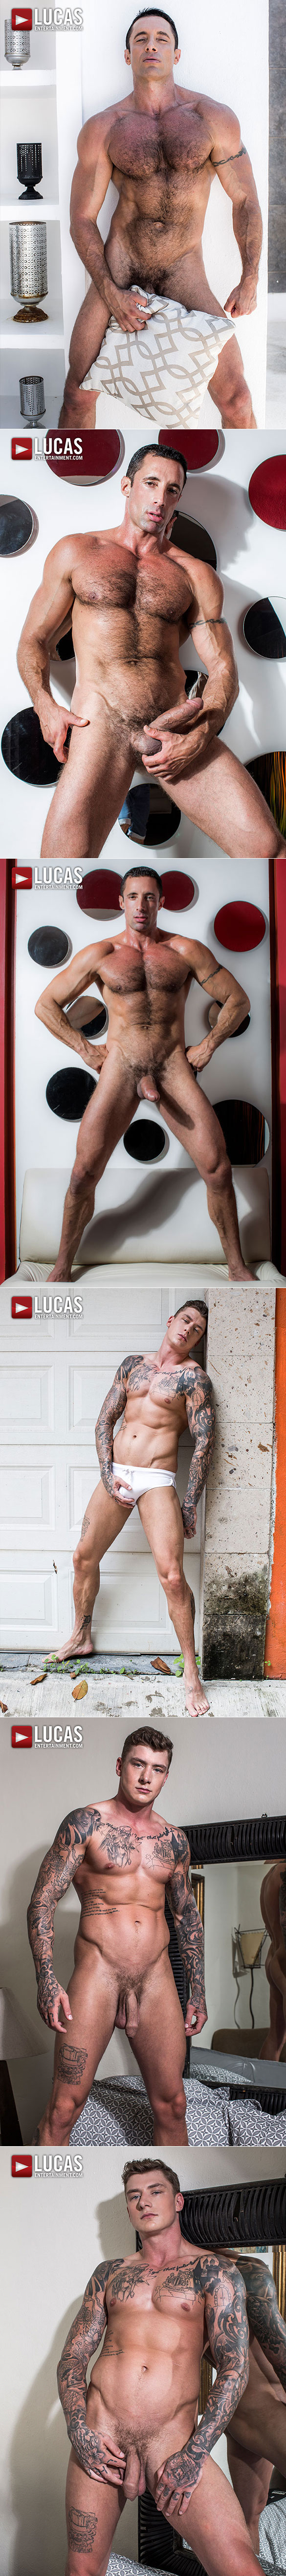 Lucas Entertainment: Nick Capra gets pounded raw by Geordie Jackson in "Fit as Fuck"